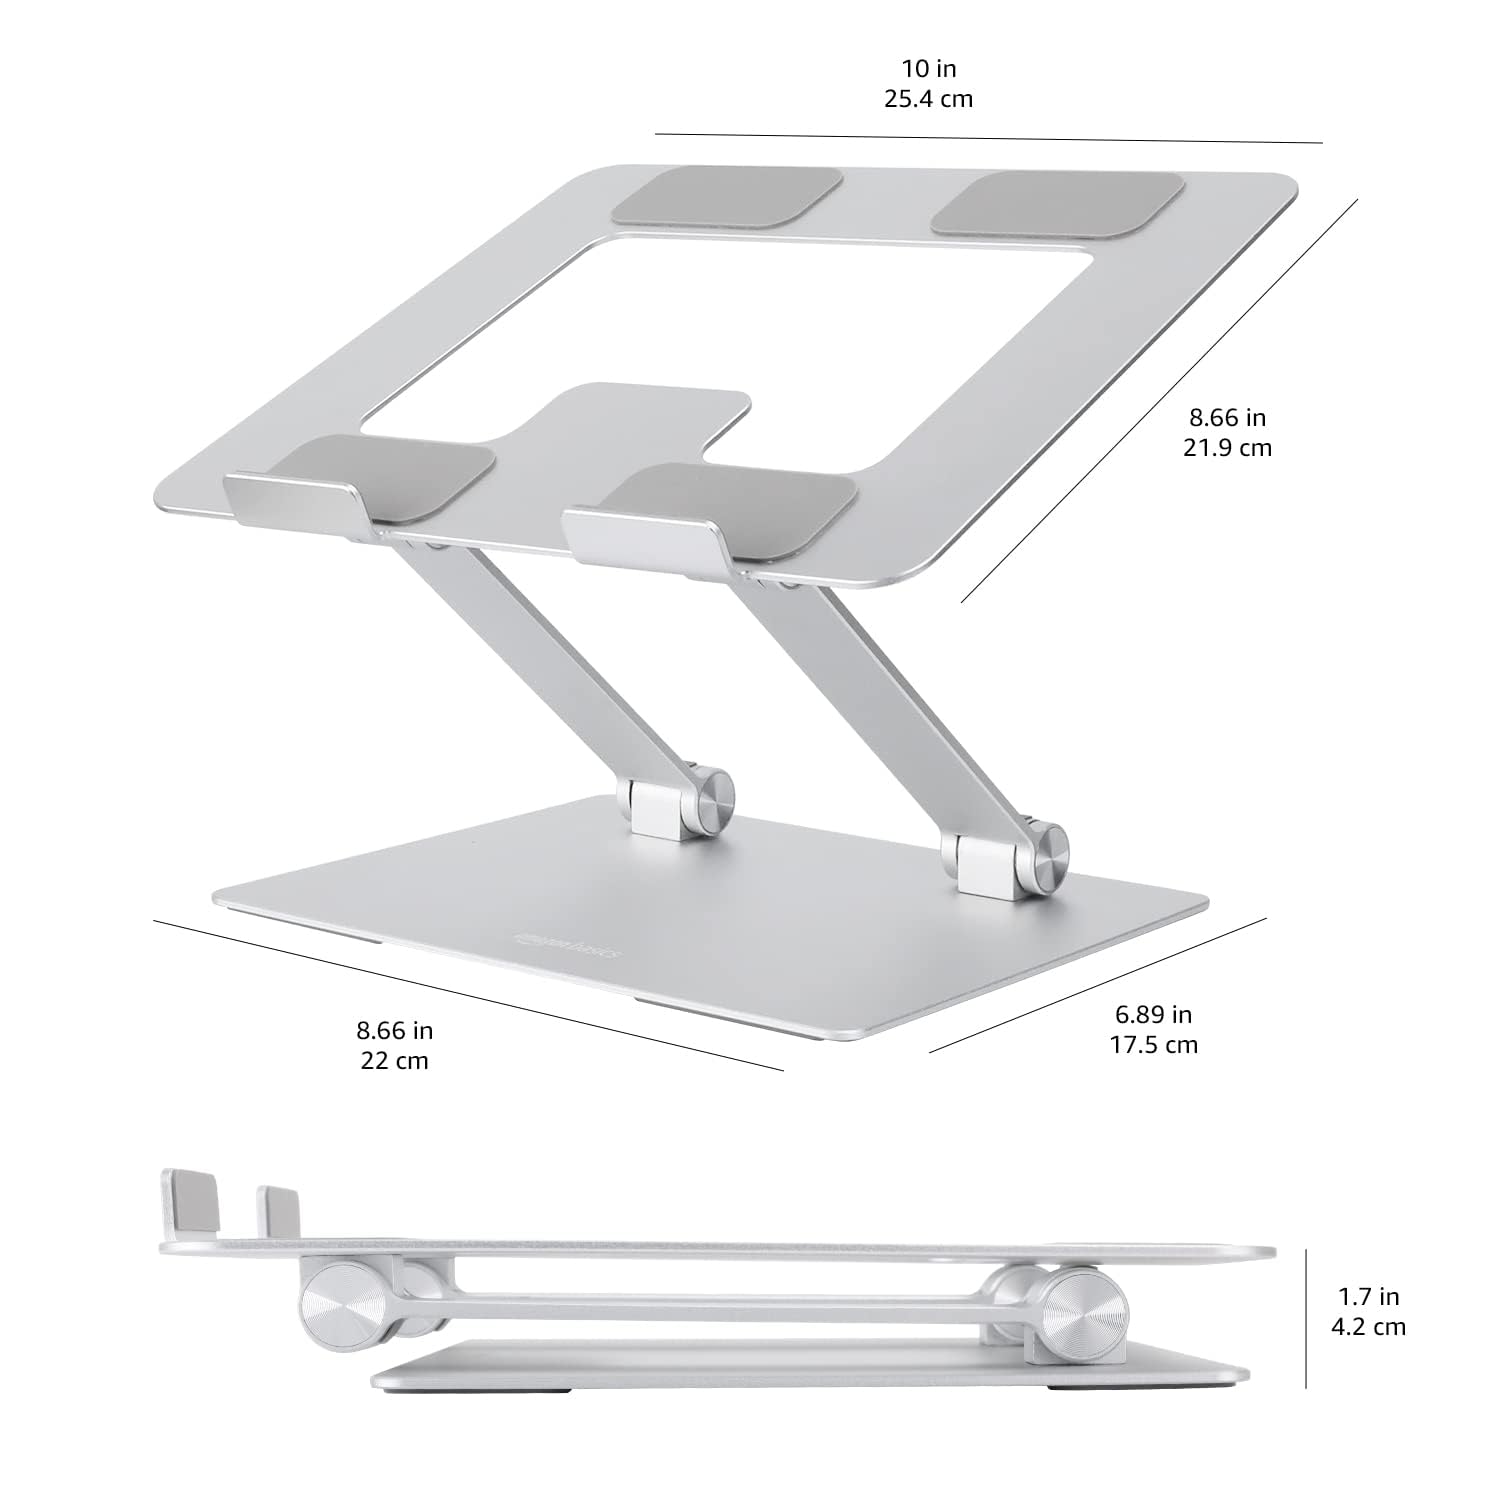 Amazon Basics Laptop Stand Riser, Portable and Adjustable Stand, for Notebook up to 17 Inch, Silver